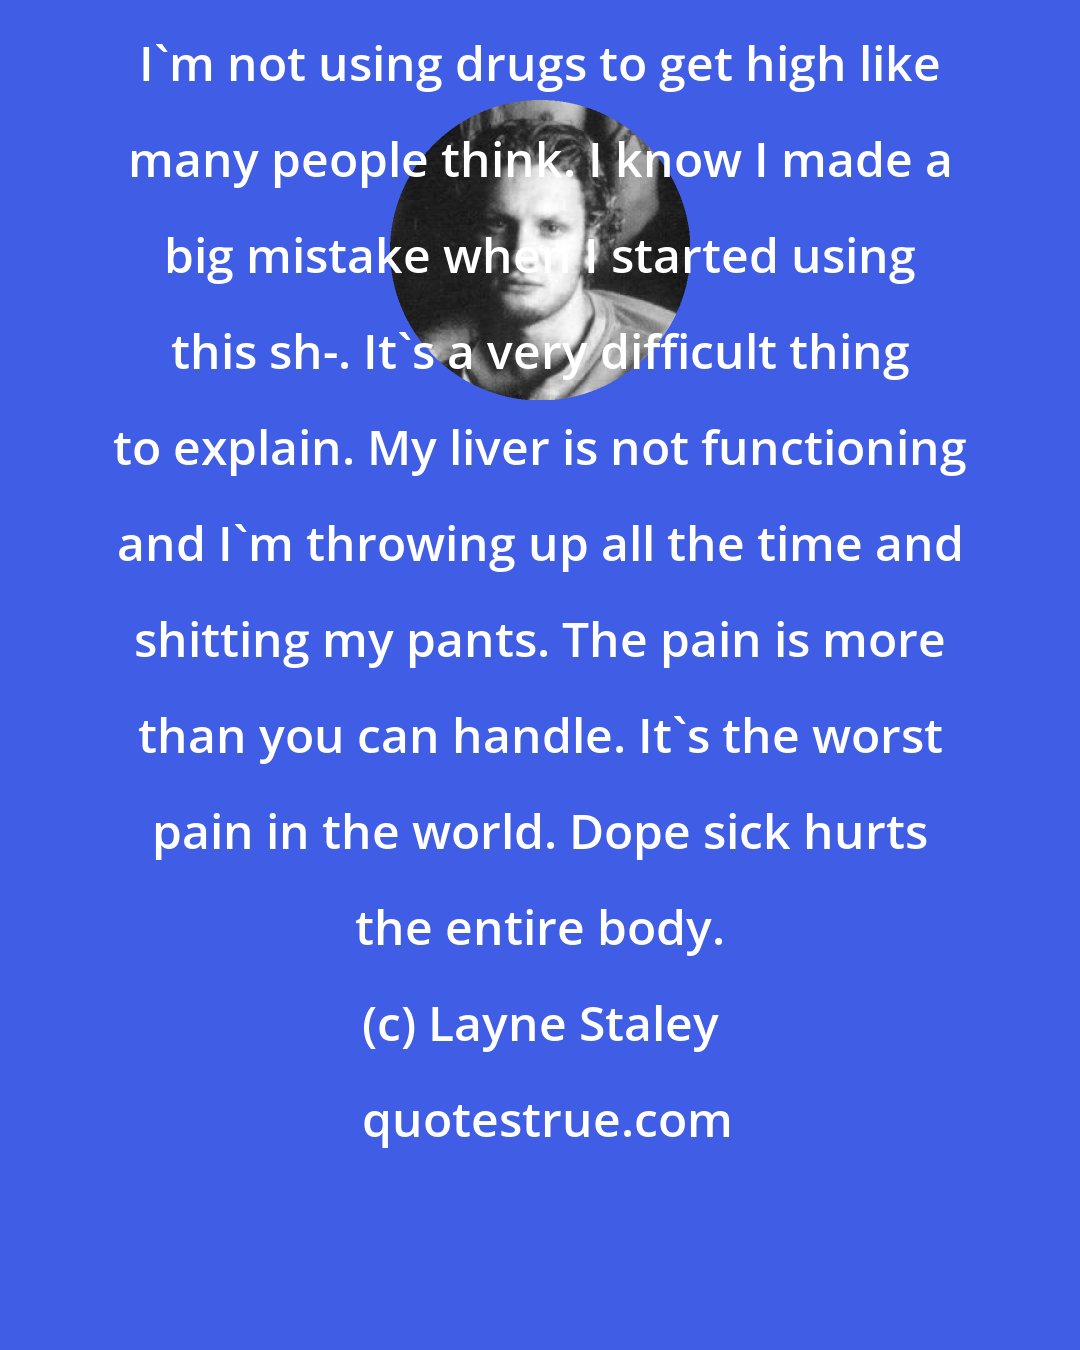 Layne Staley: I'm not using drugs to get high like many people think. I know I made a big mistake when I started using this sh-. It's a very difficult thing to explain. My liver is not functioning and I'm throwing up all the time and shitting my pants. The pain is more than you can handle. It's the worst pain in the world. Dope sick hurts the entire body.